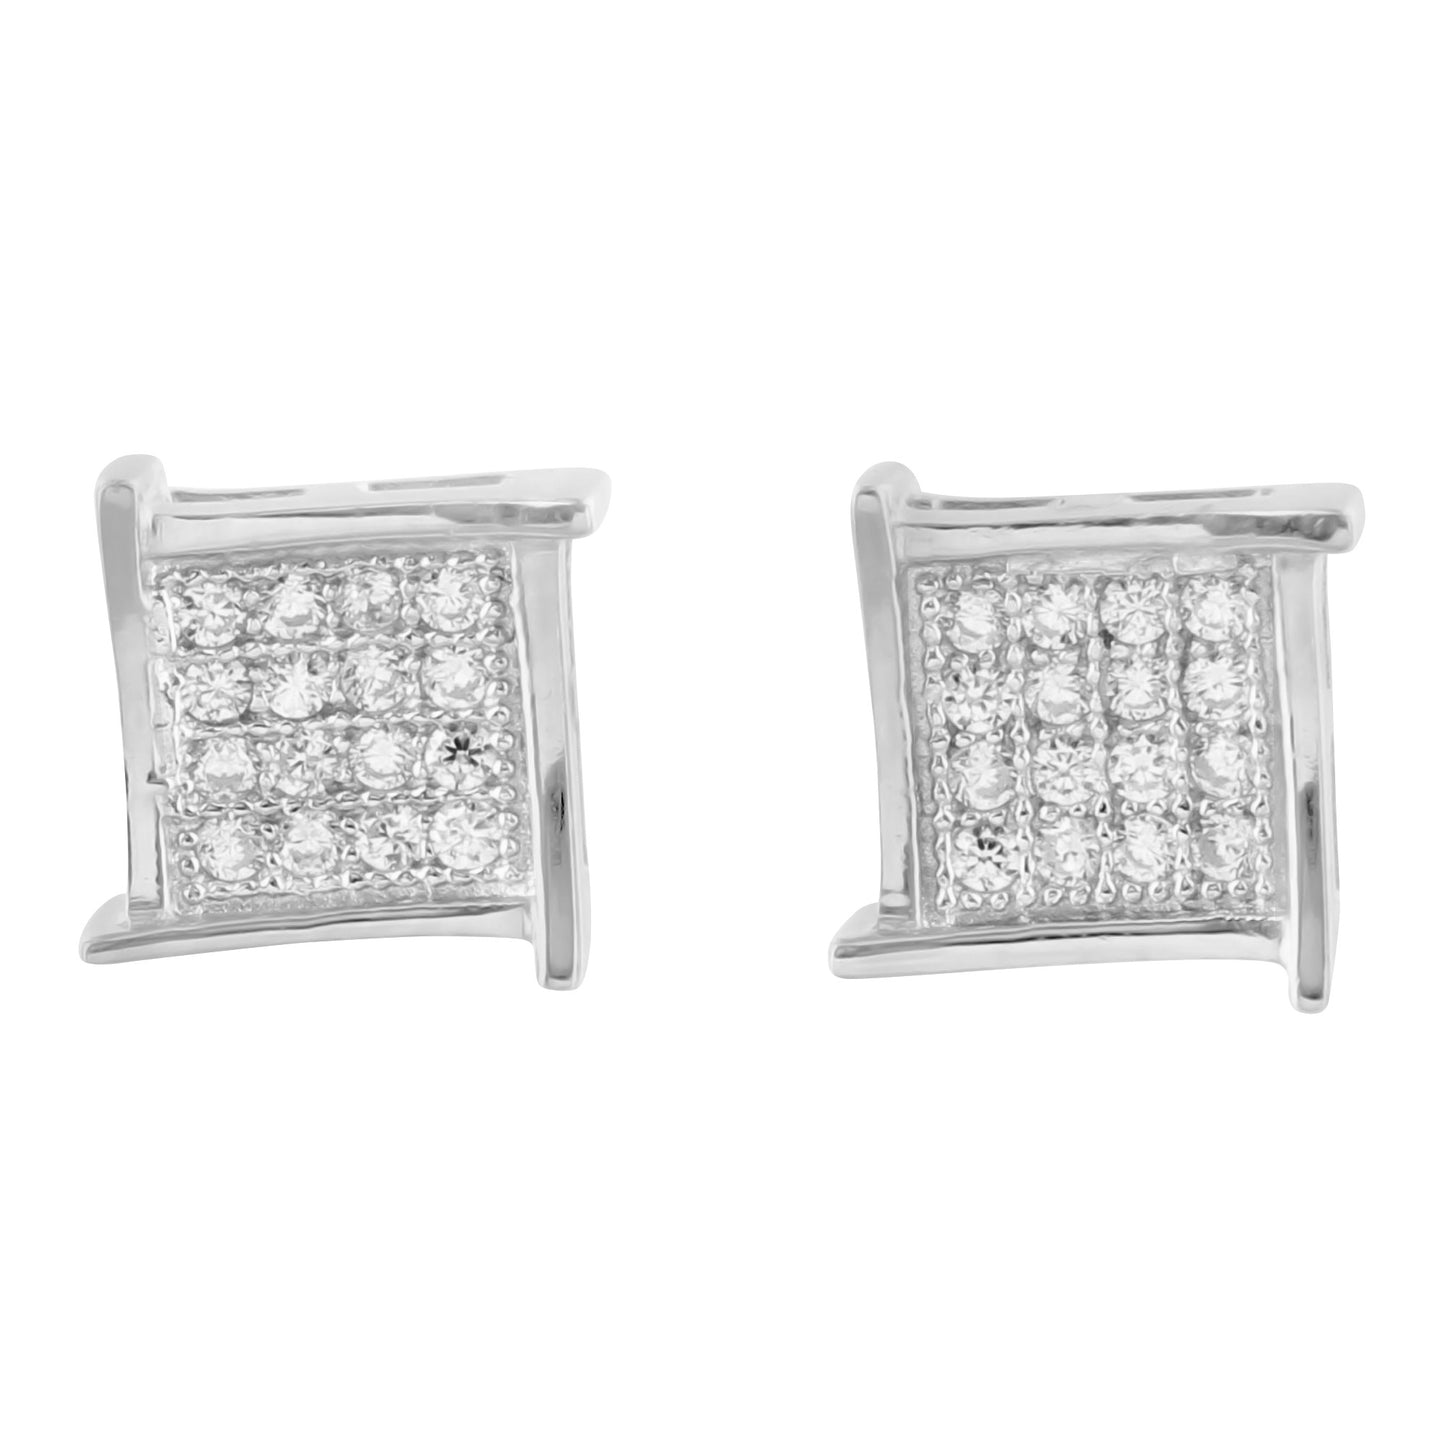 925 Silver 8 MM Lab Diamond Square White Gold Finish Earrings